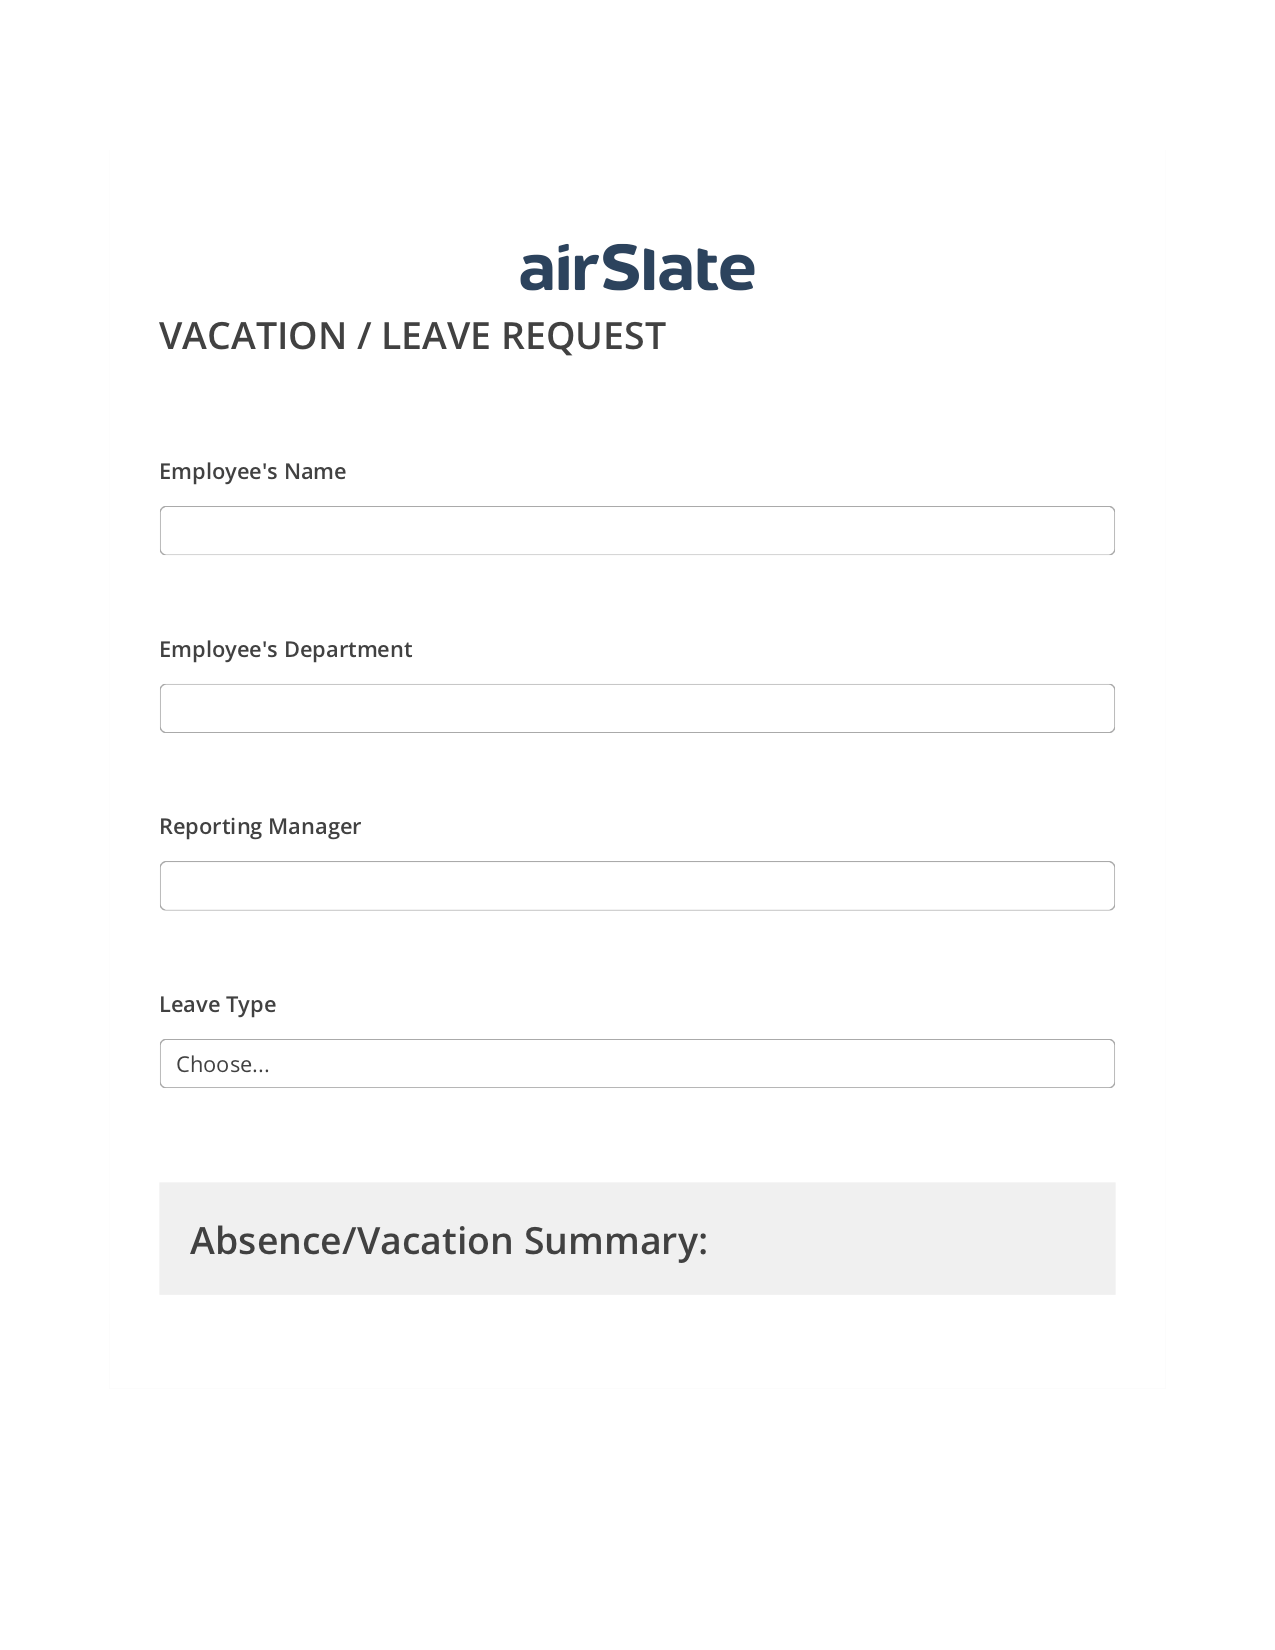 Vacation/Leave Request Workflow Pre-fill Dropdowns from Airtable, Add Tags to Slate Bot, Post-finish Document Bot